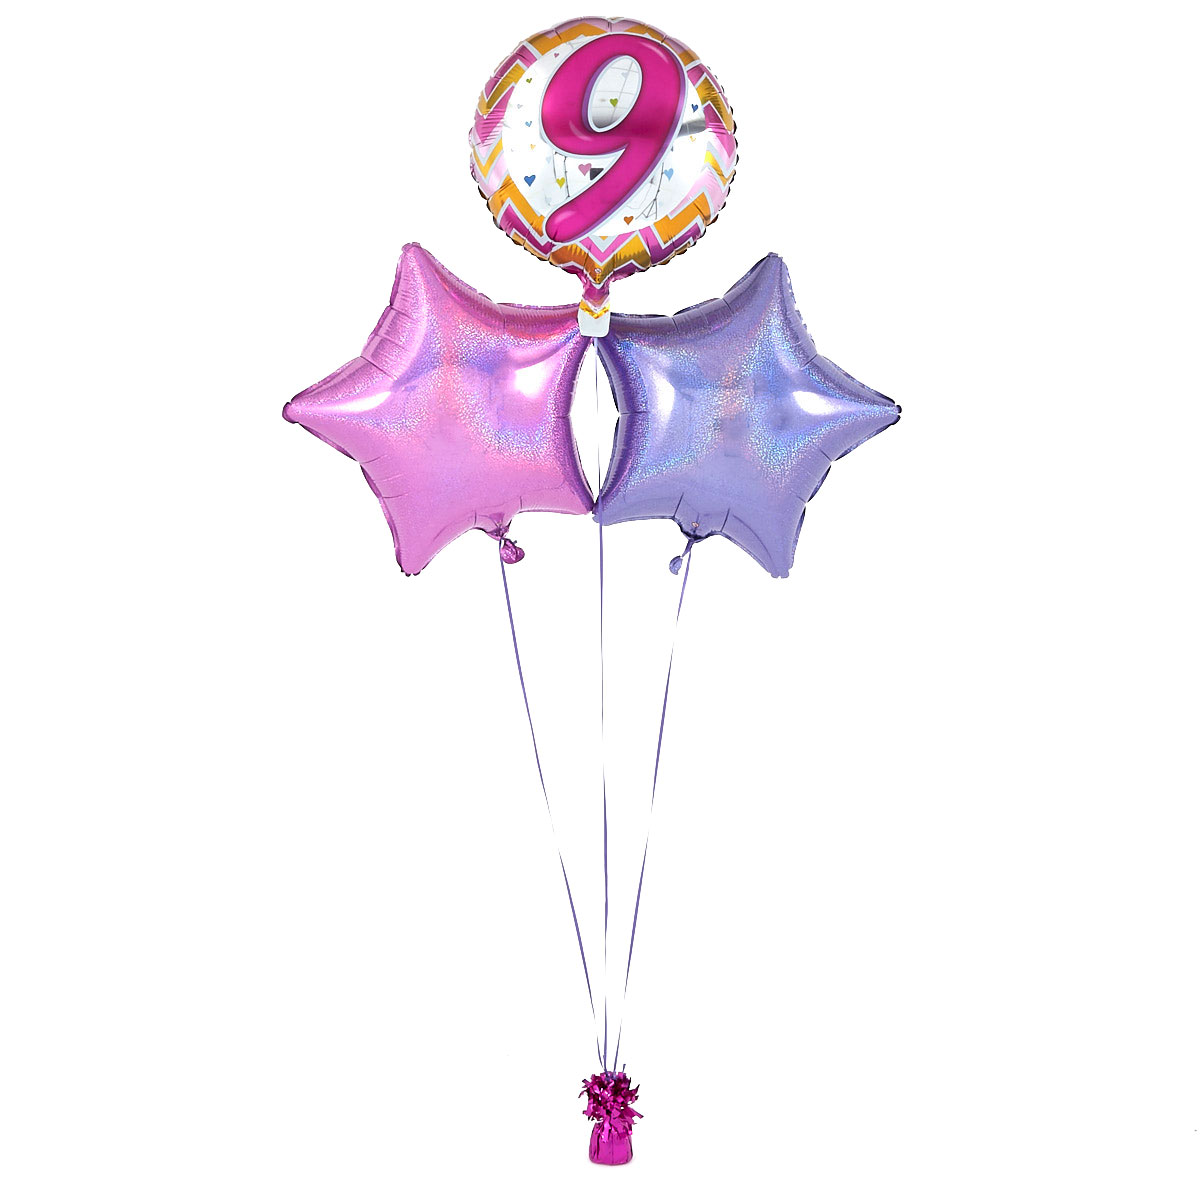 9th Birthday Zig-Zag Pink Balloon Bouquet - DELIVERED INFLATED!